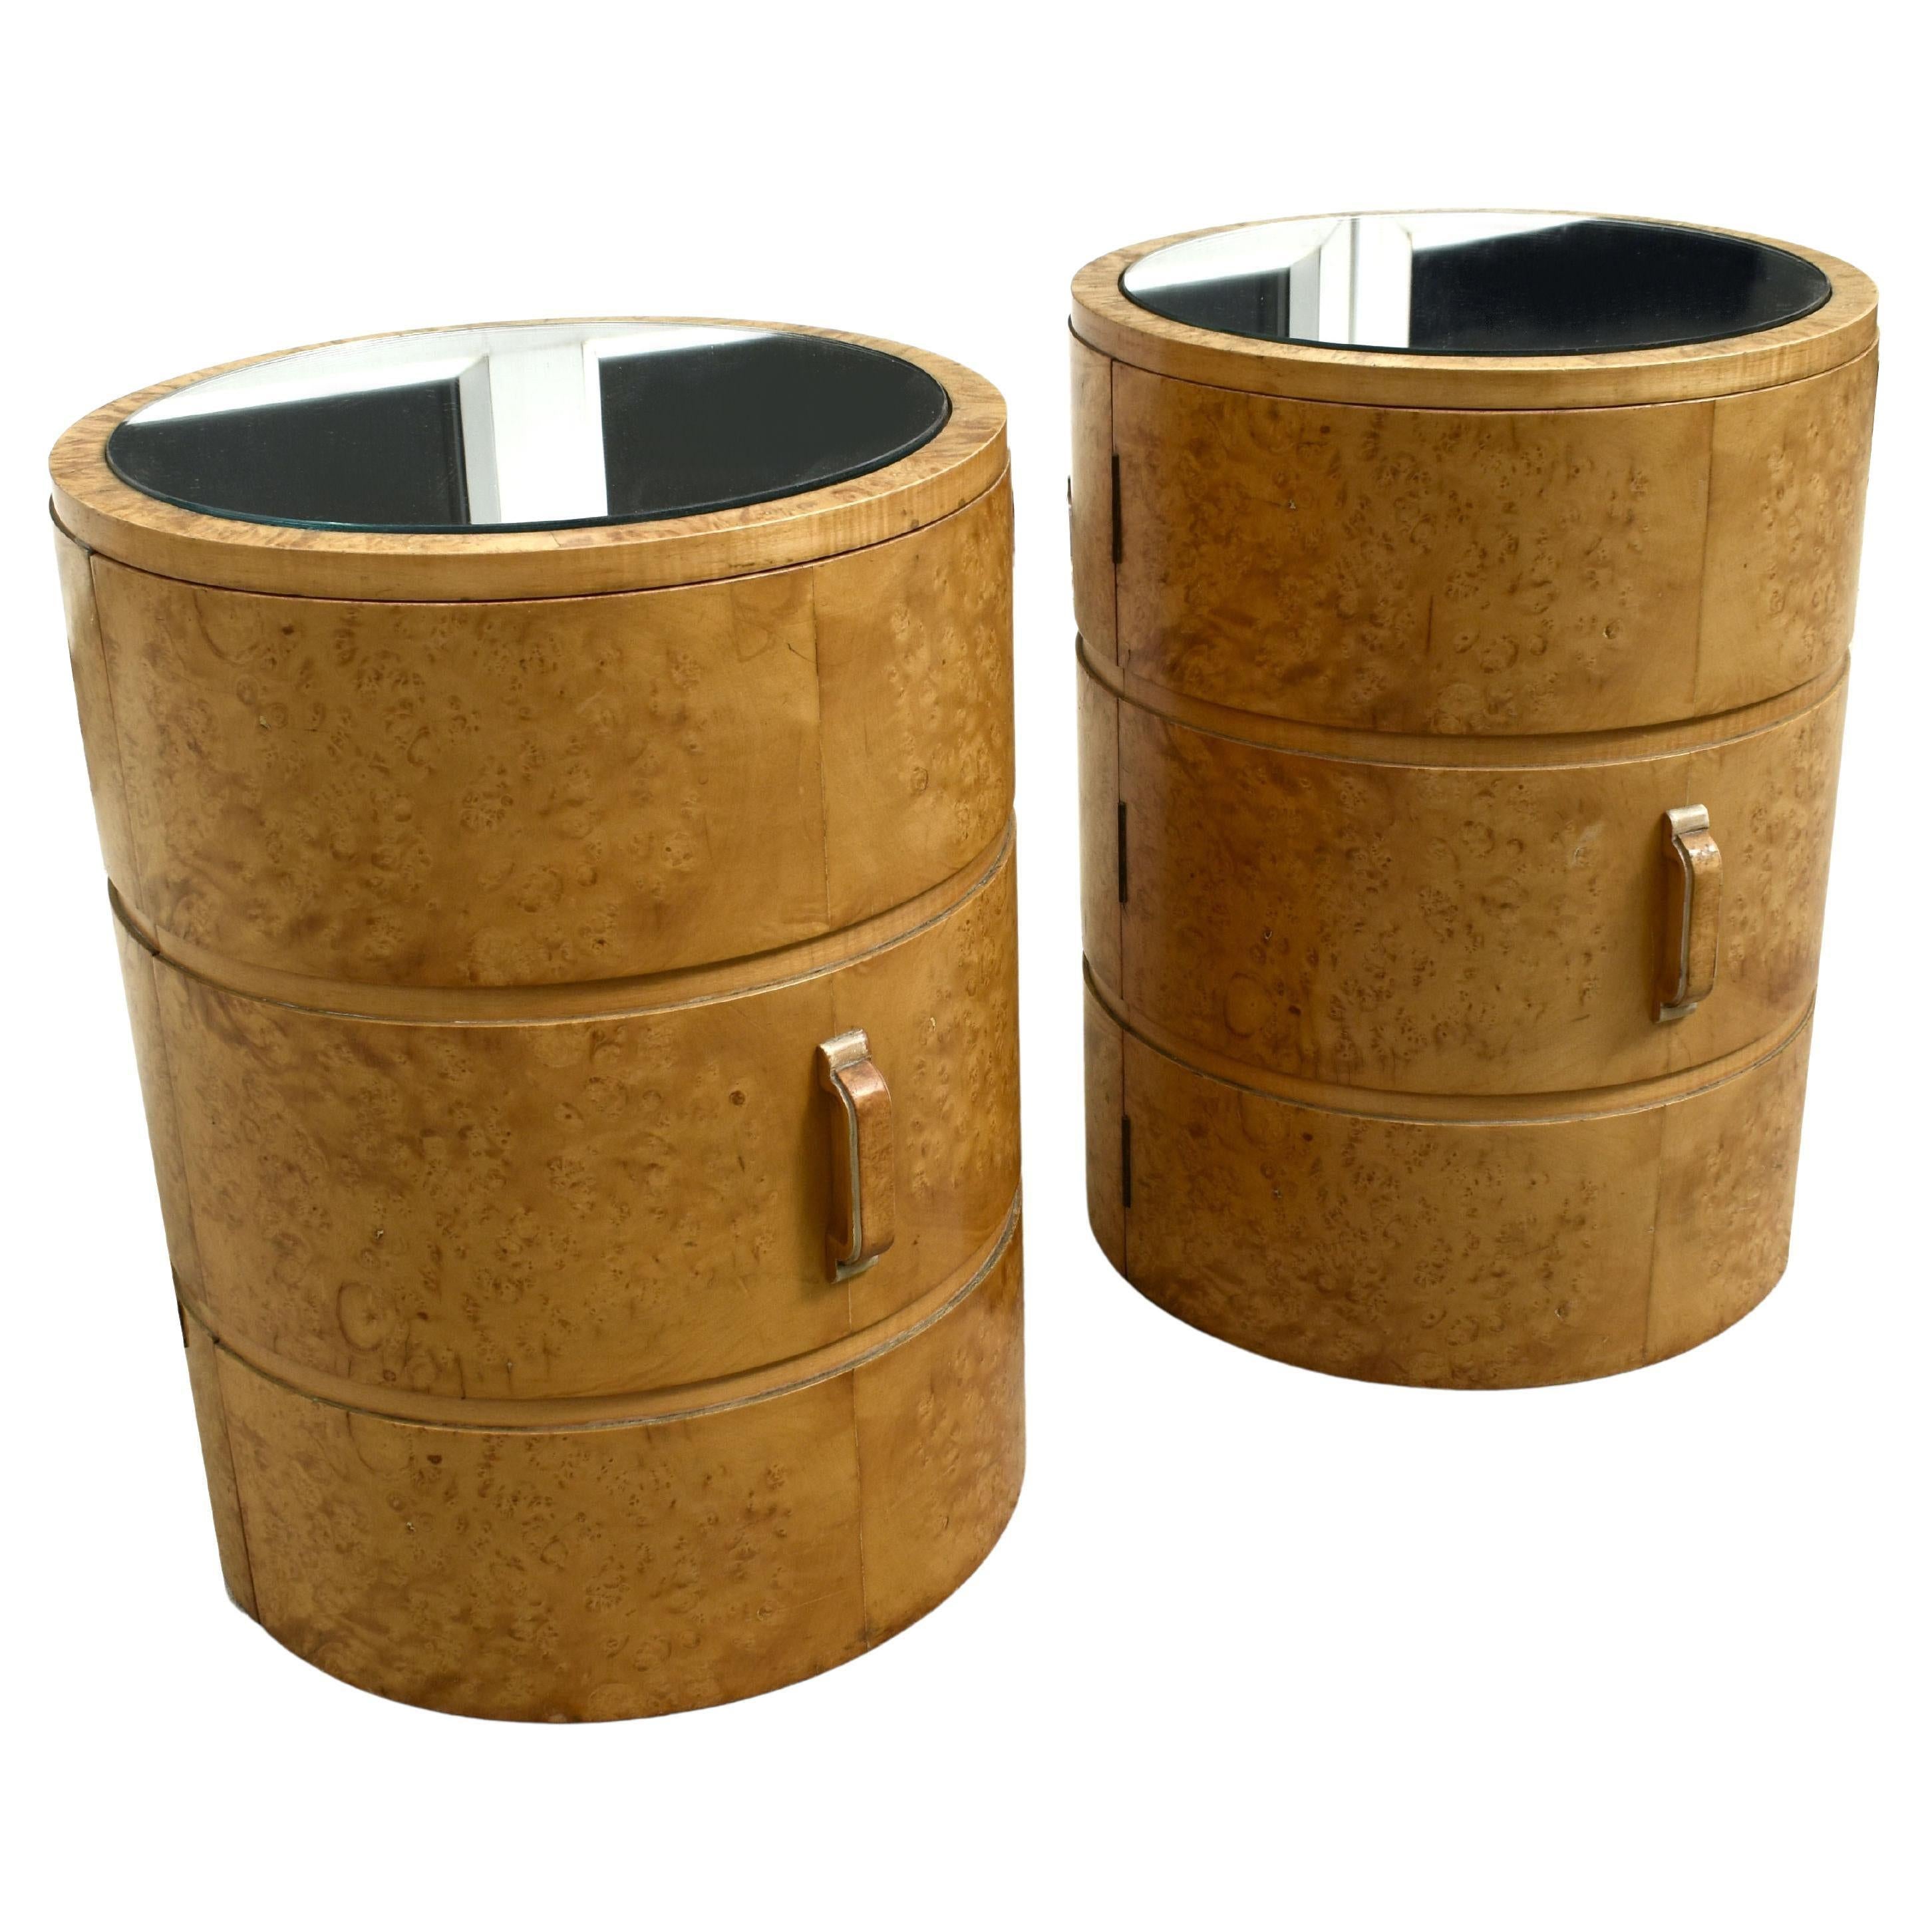 For your consideration are these high end fabulous matching pair of Art Deco circular bedside cabinet tables, dating to the 1930s. For those less well versed in Art Deco could be forgiven in thinking these cabinets were modern such is the styling